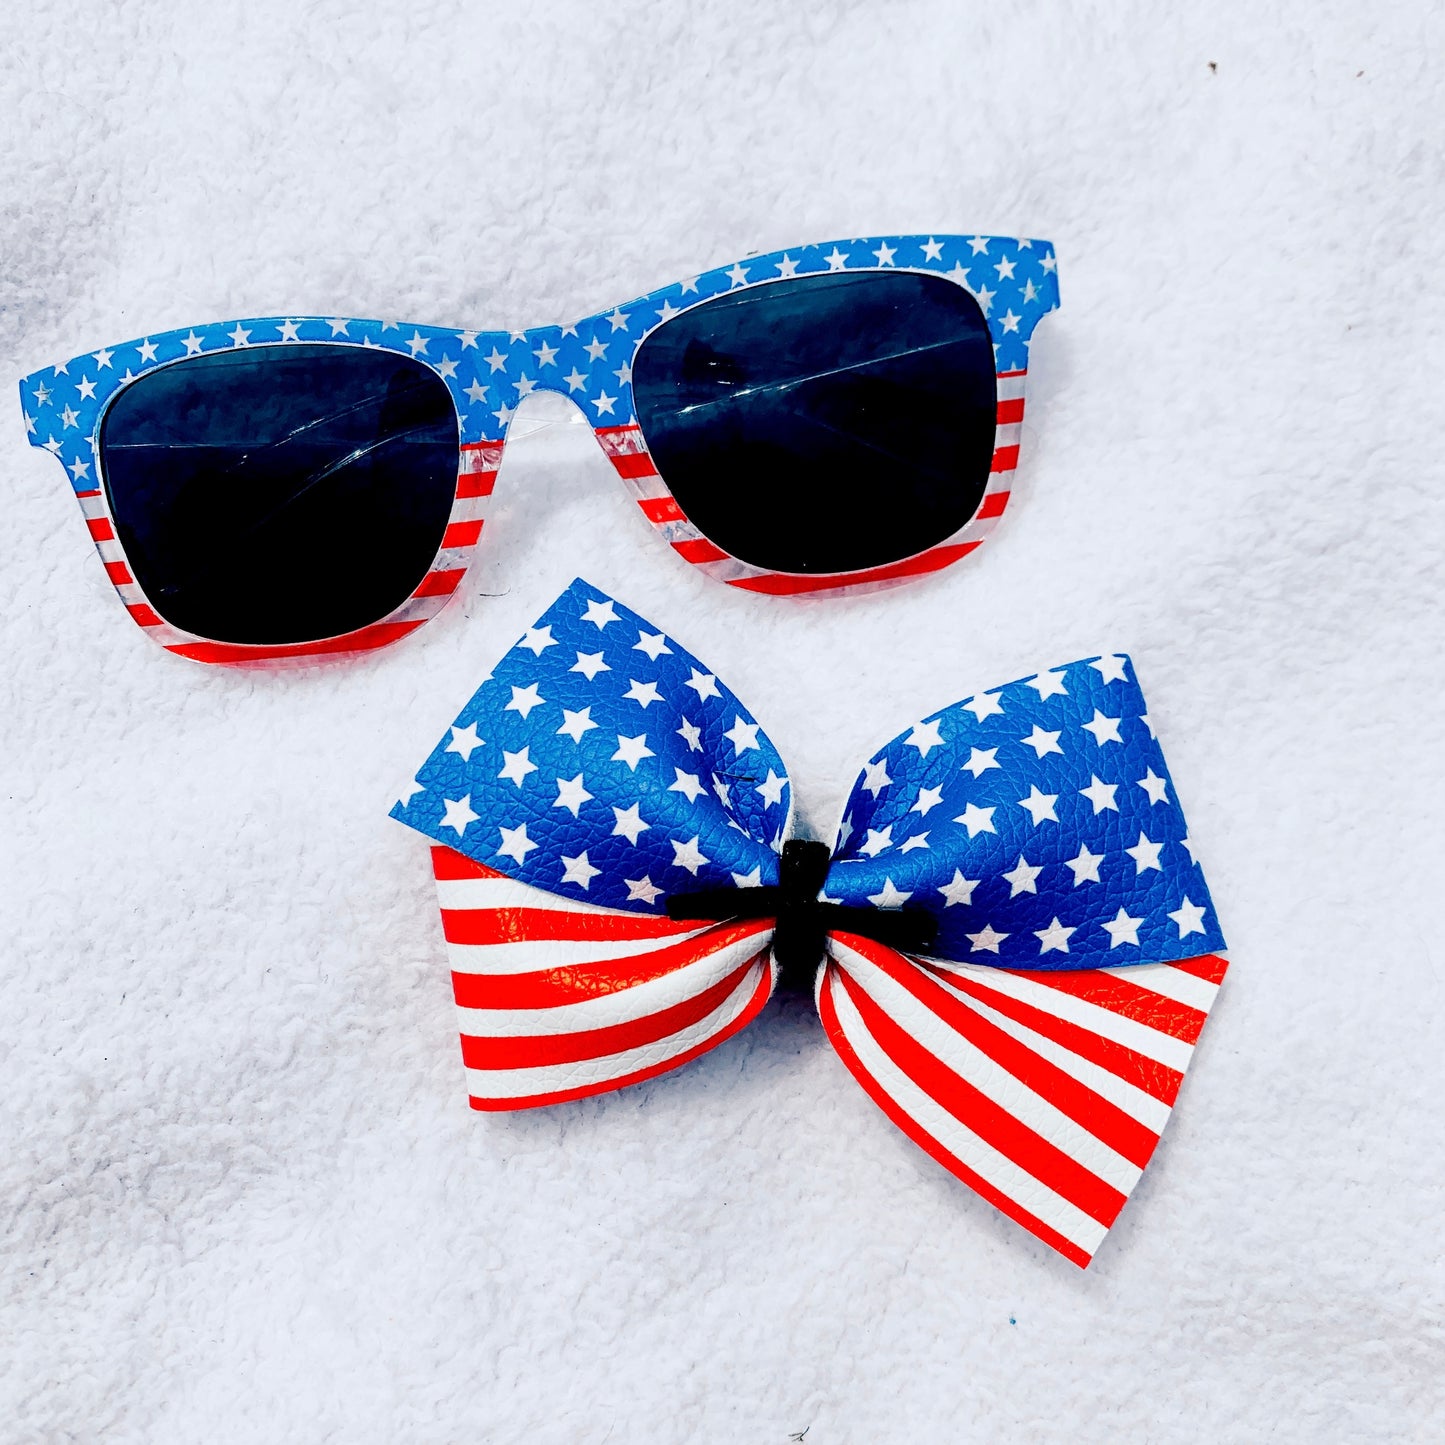 Stars and stripes bow